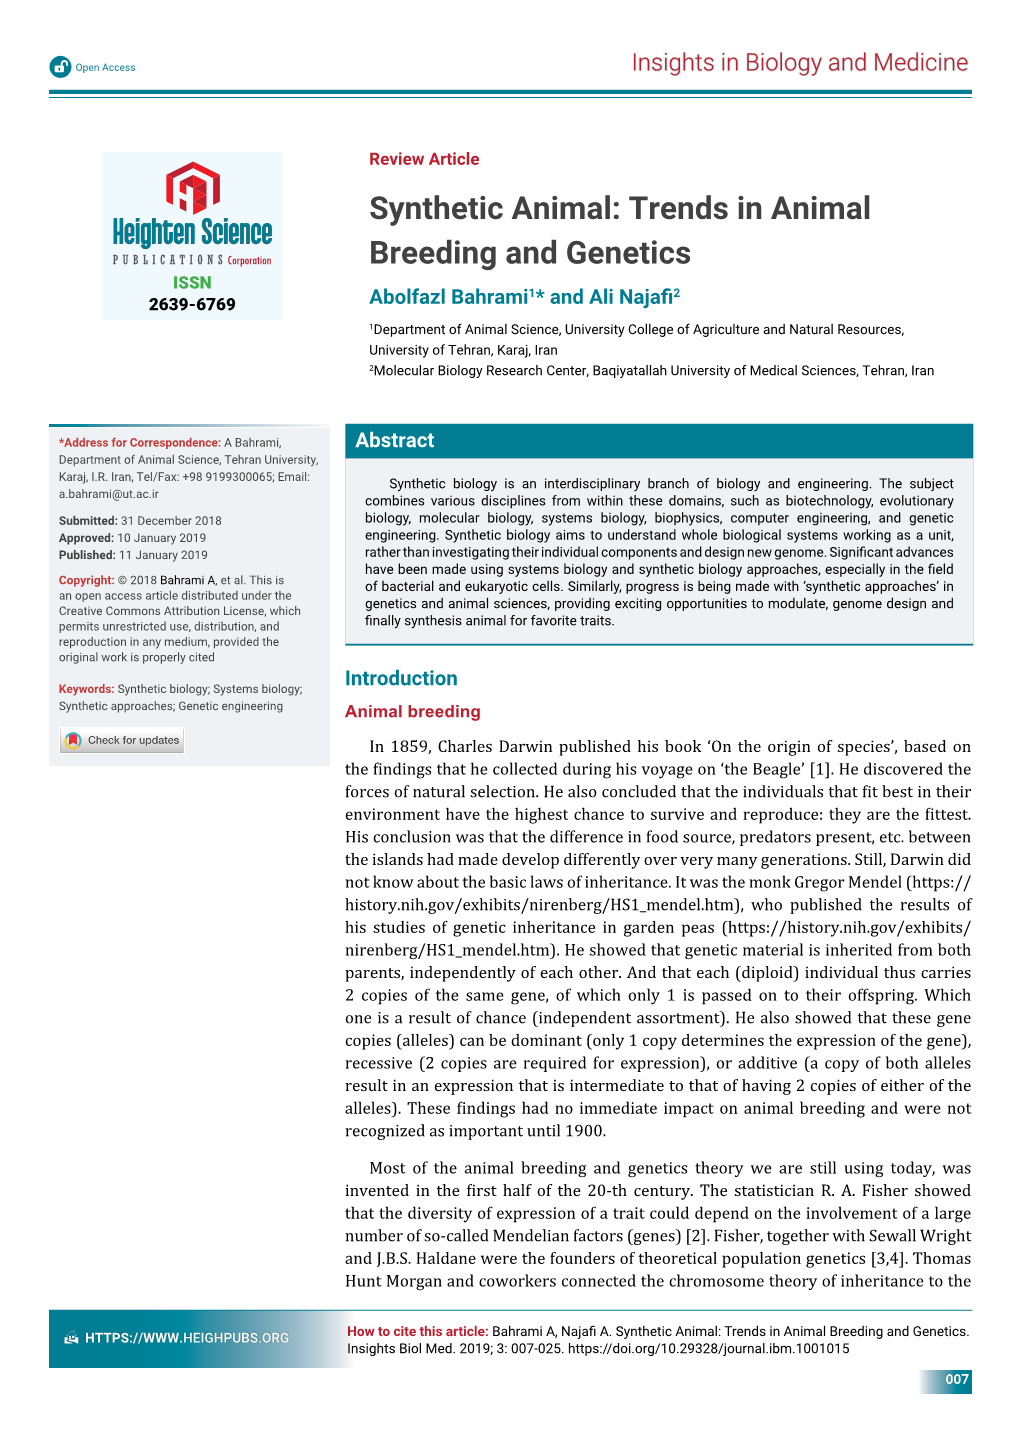 Synthetic Animal: Trends in Animal Breeding and Genetics